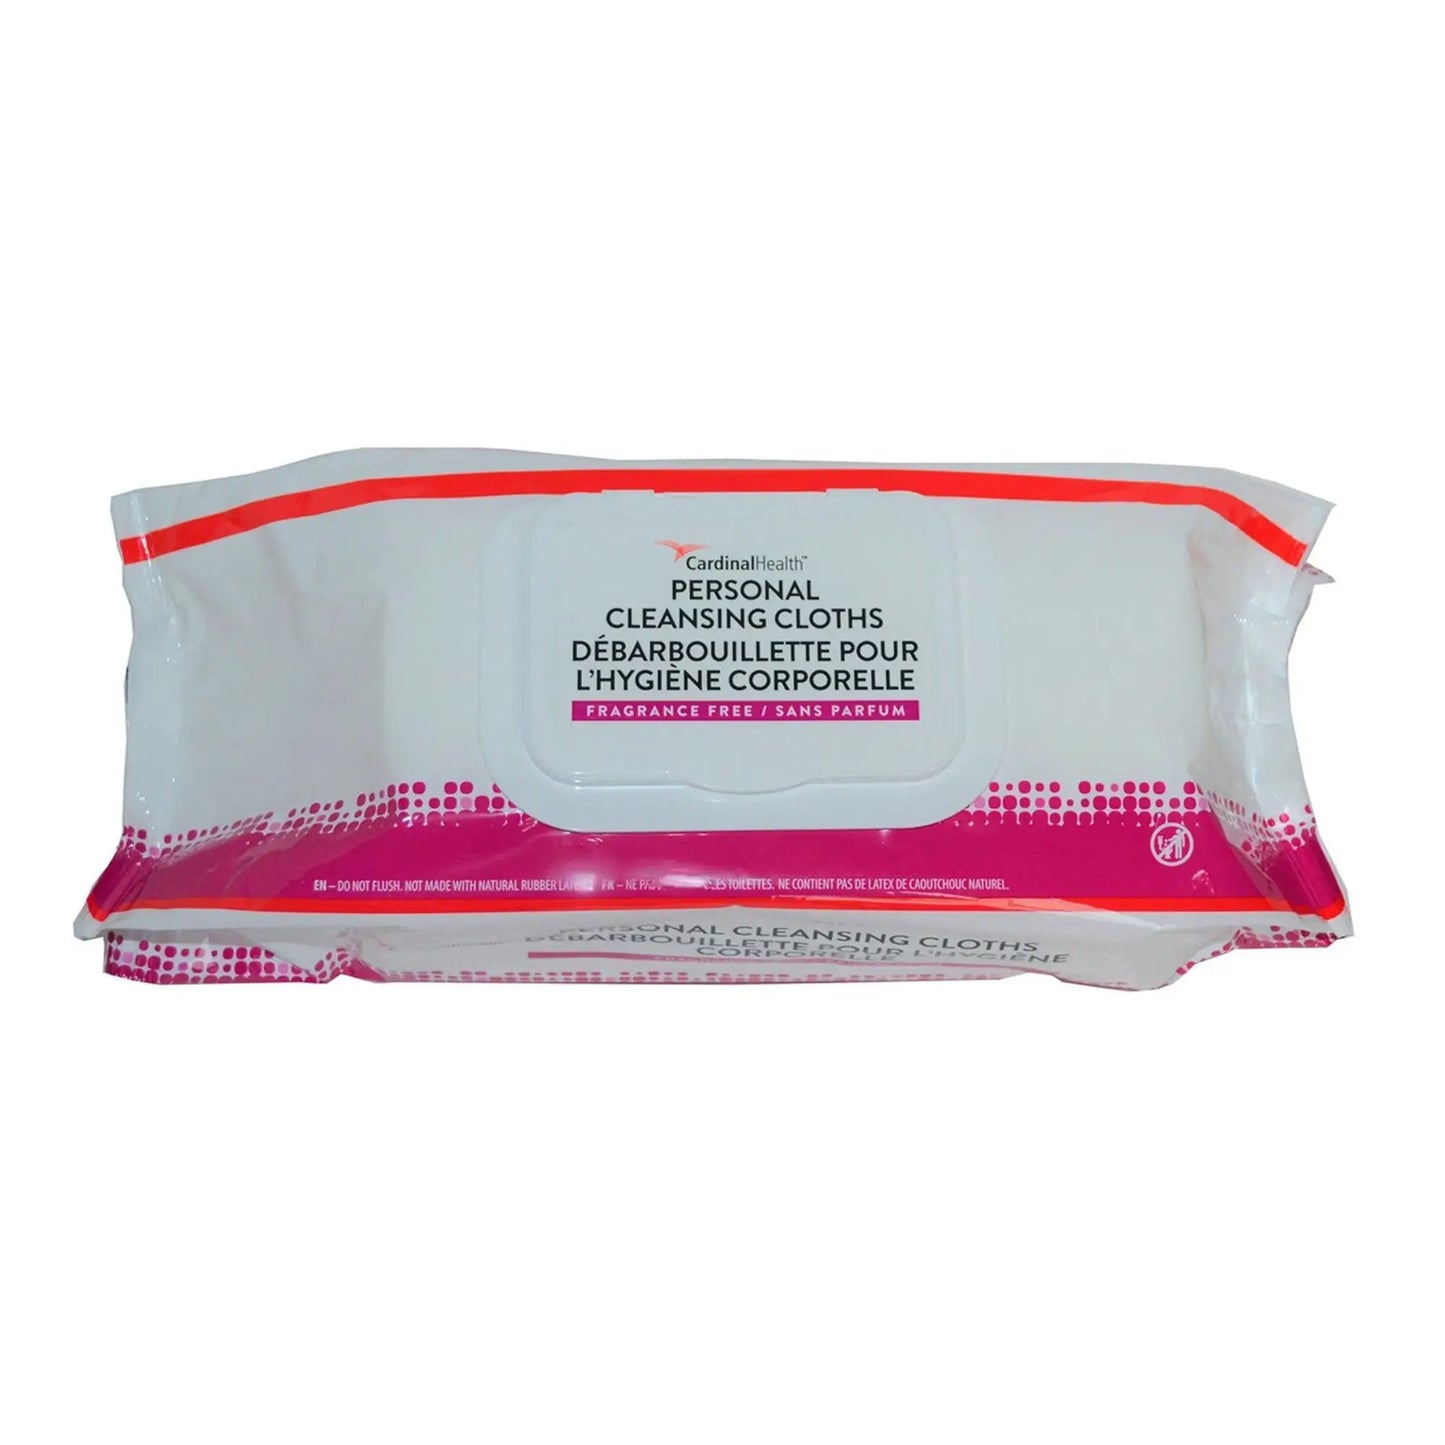 Cardinal Health Personal Cleansing Cloths